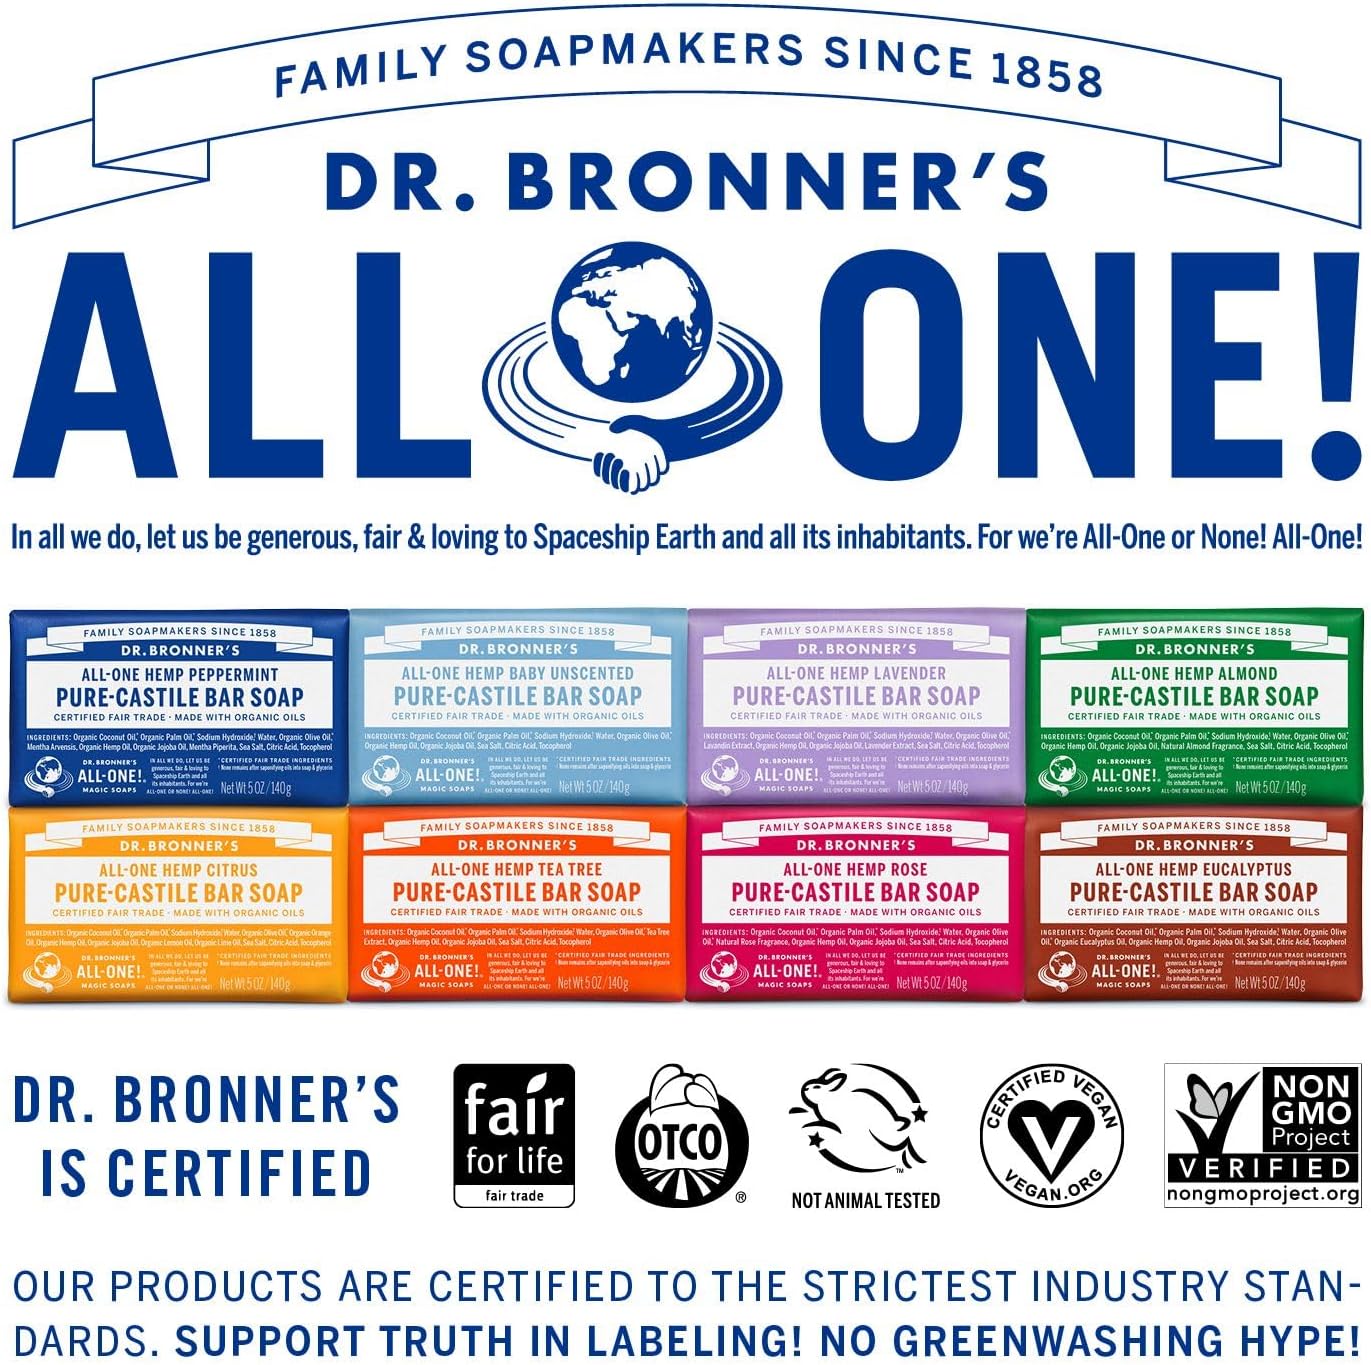 Dr. Bronner's - Pure-Castile Bar Soap (Baby Unscented, 5 ounce, 3-pack) - Made with Organic Oils, For Face, Body, Hair, Gentle for Sensitive Skin, Babies, No Added Fragrance, Biodegradable, Vegan : Bath Soaps : Beauty & Personal Care